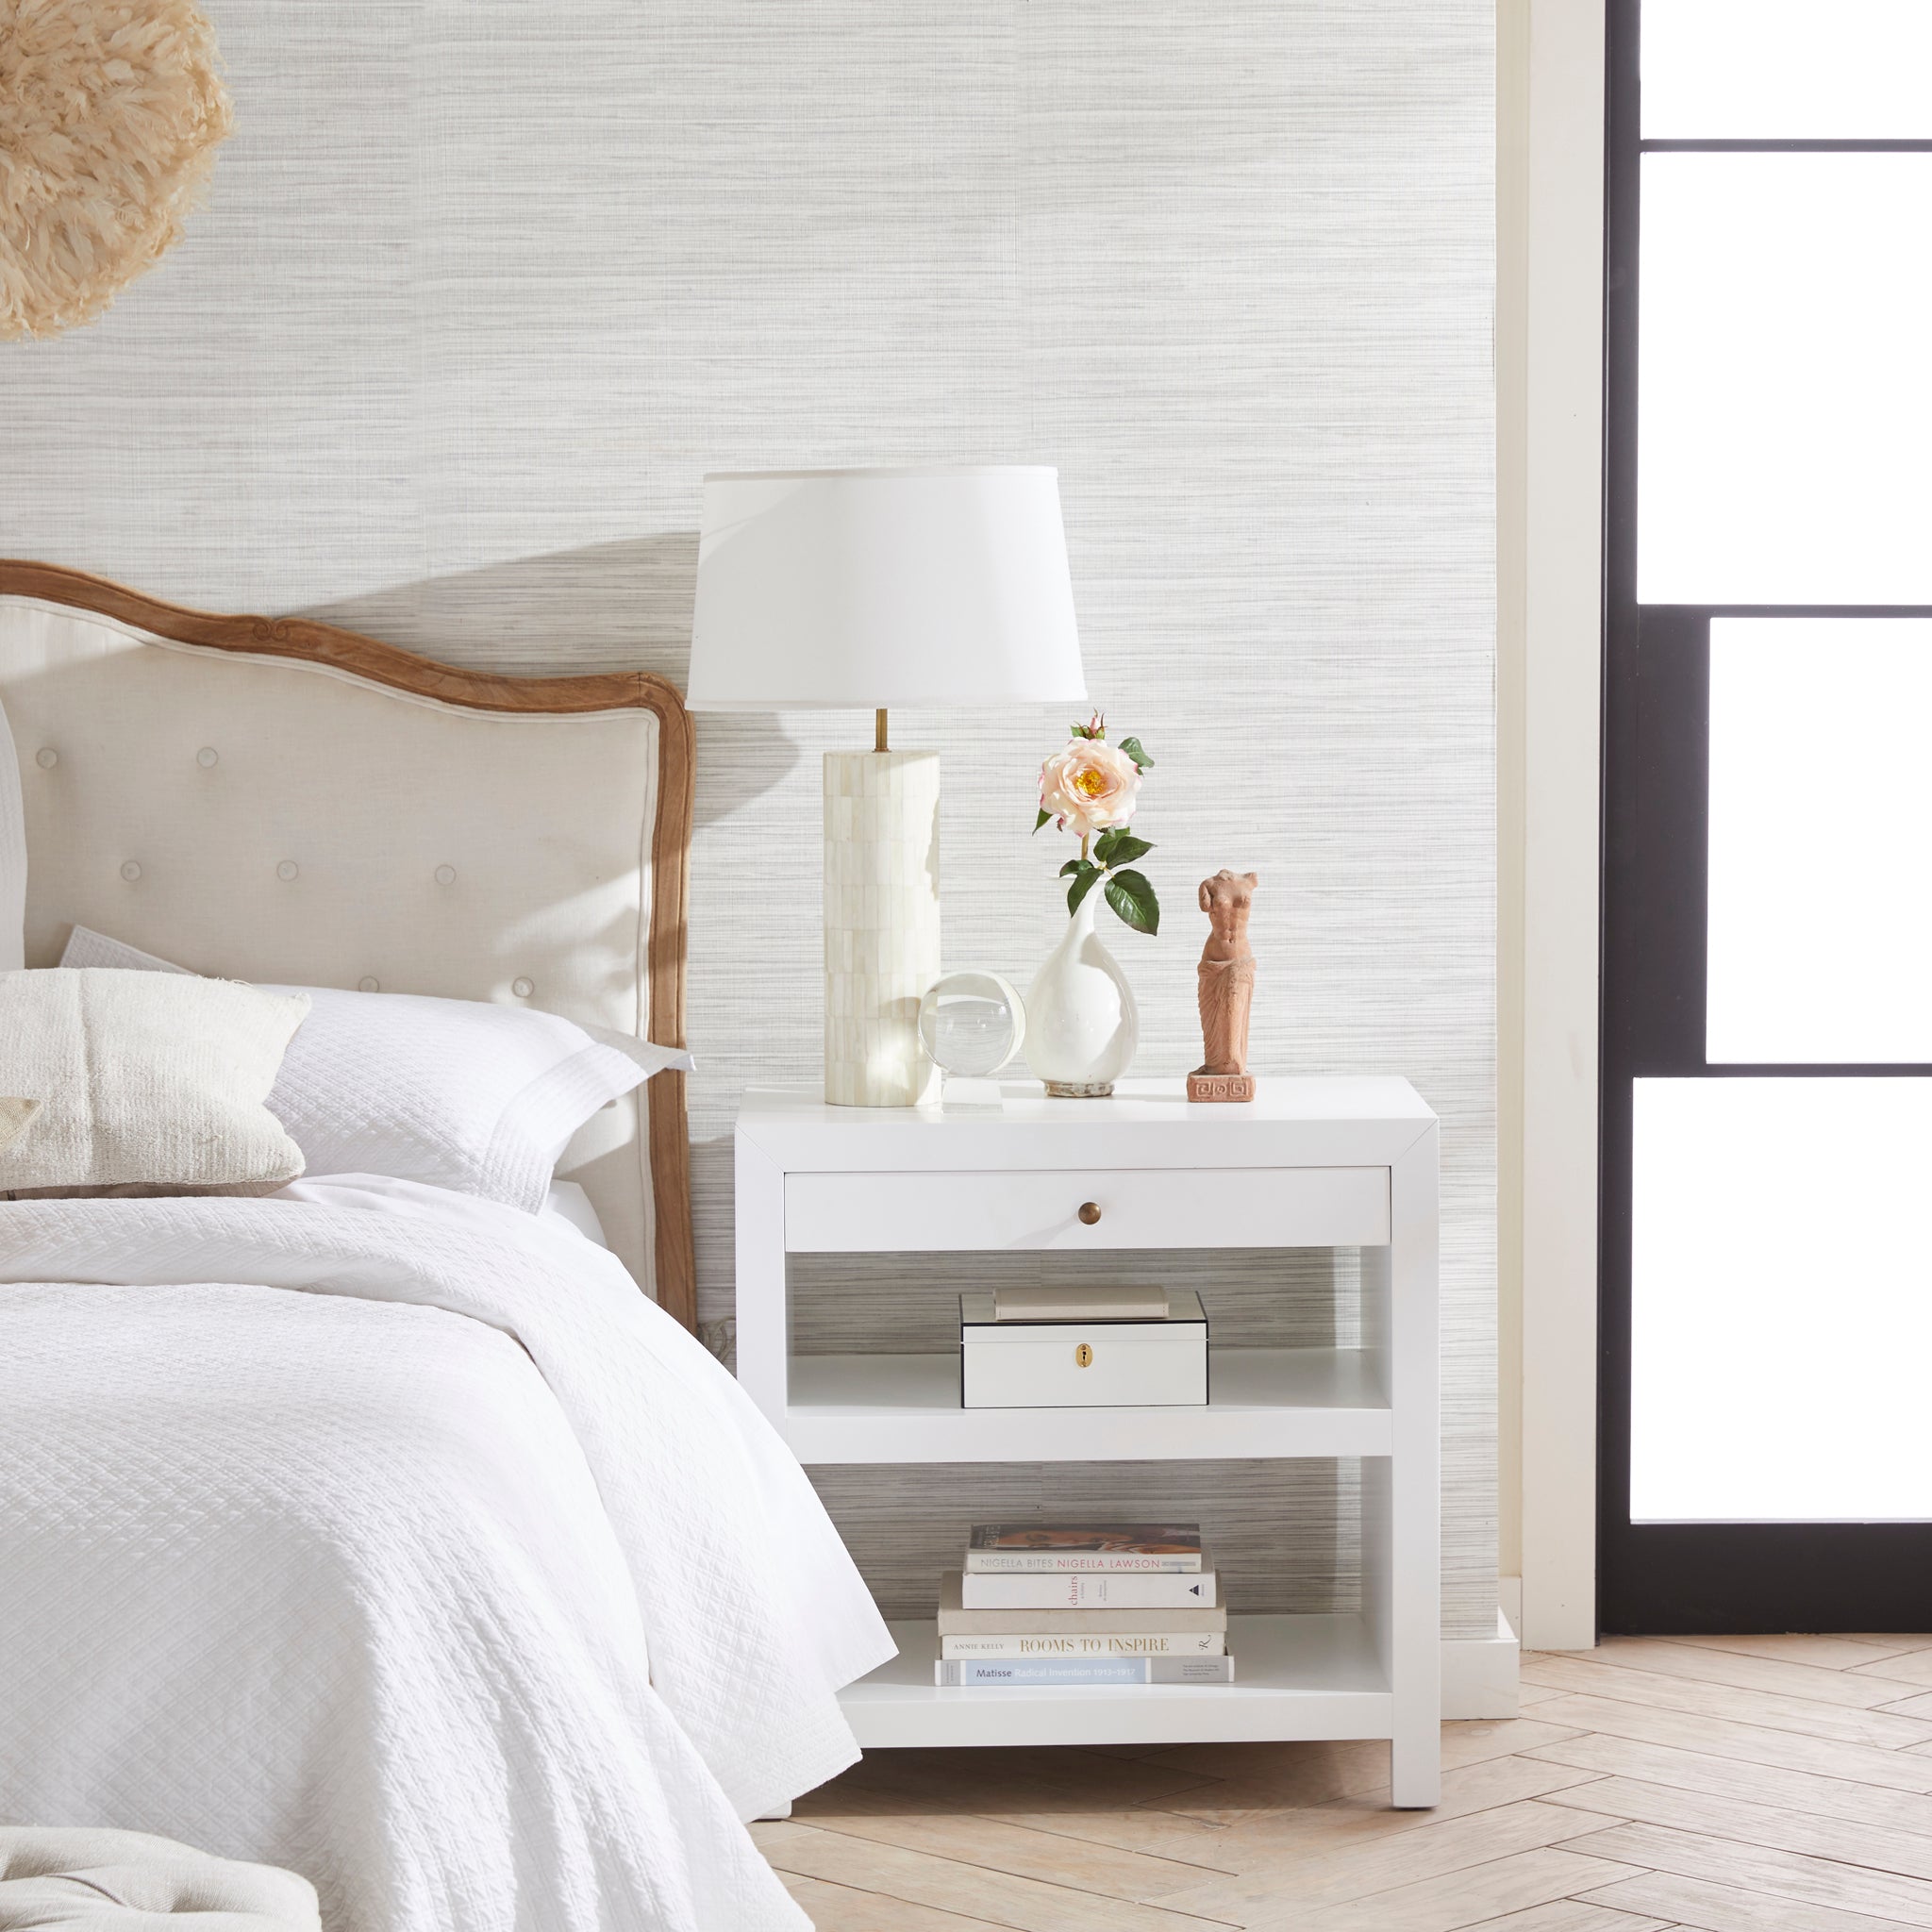 Sleek Side Table Next To Bed With Items Placed On It